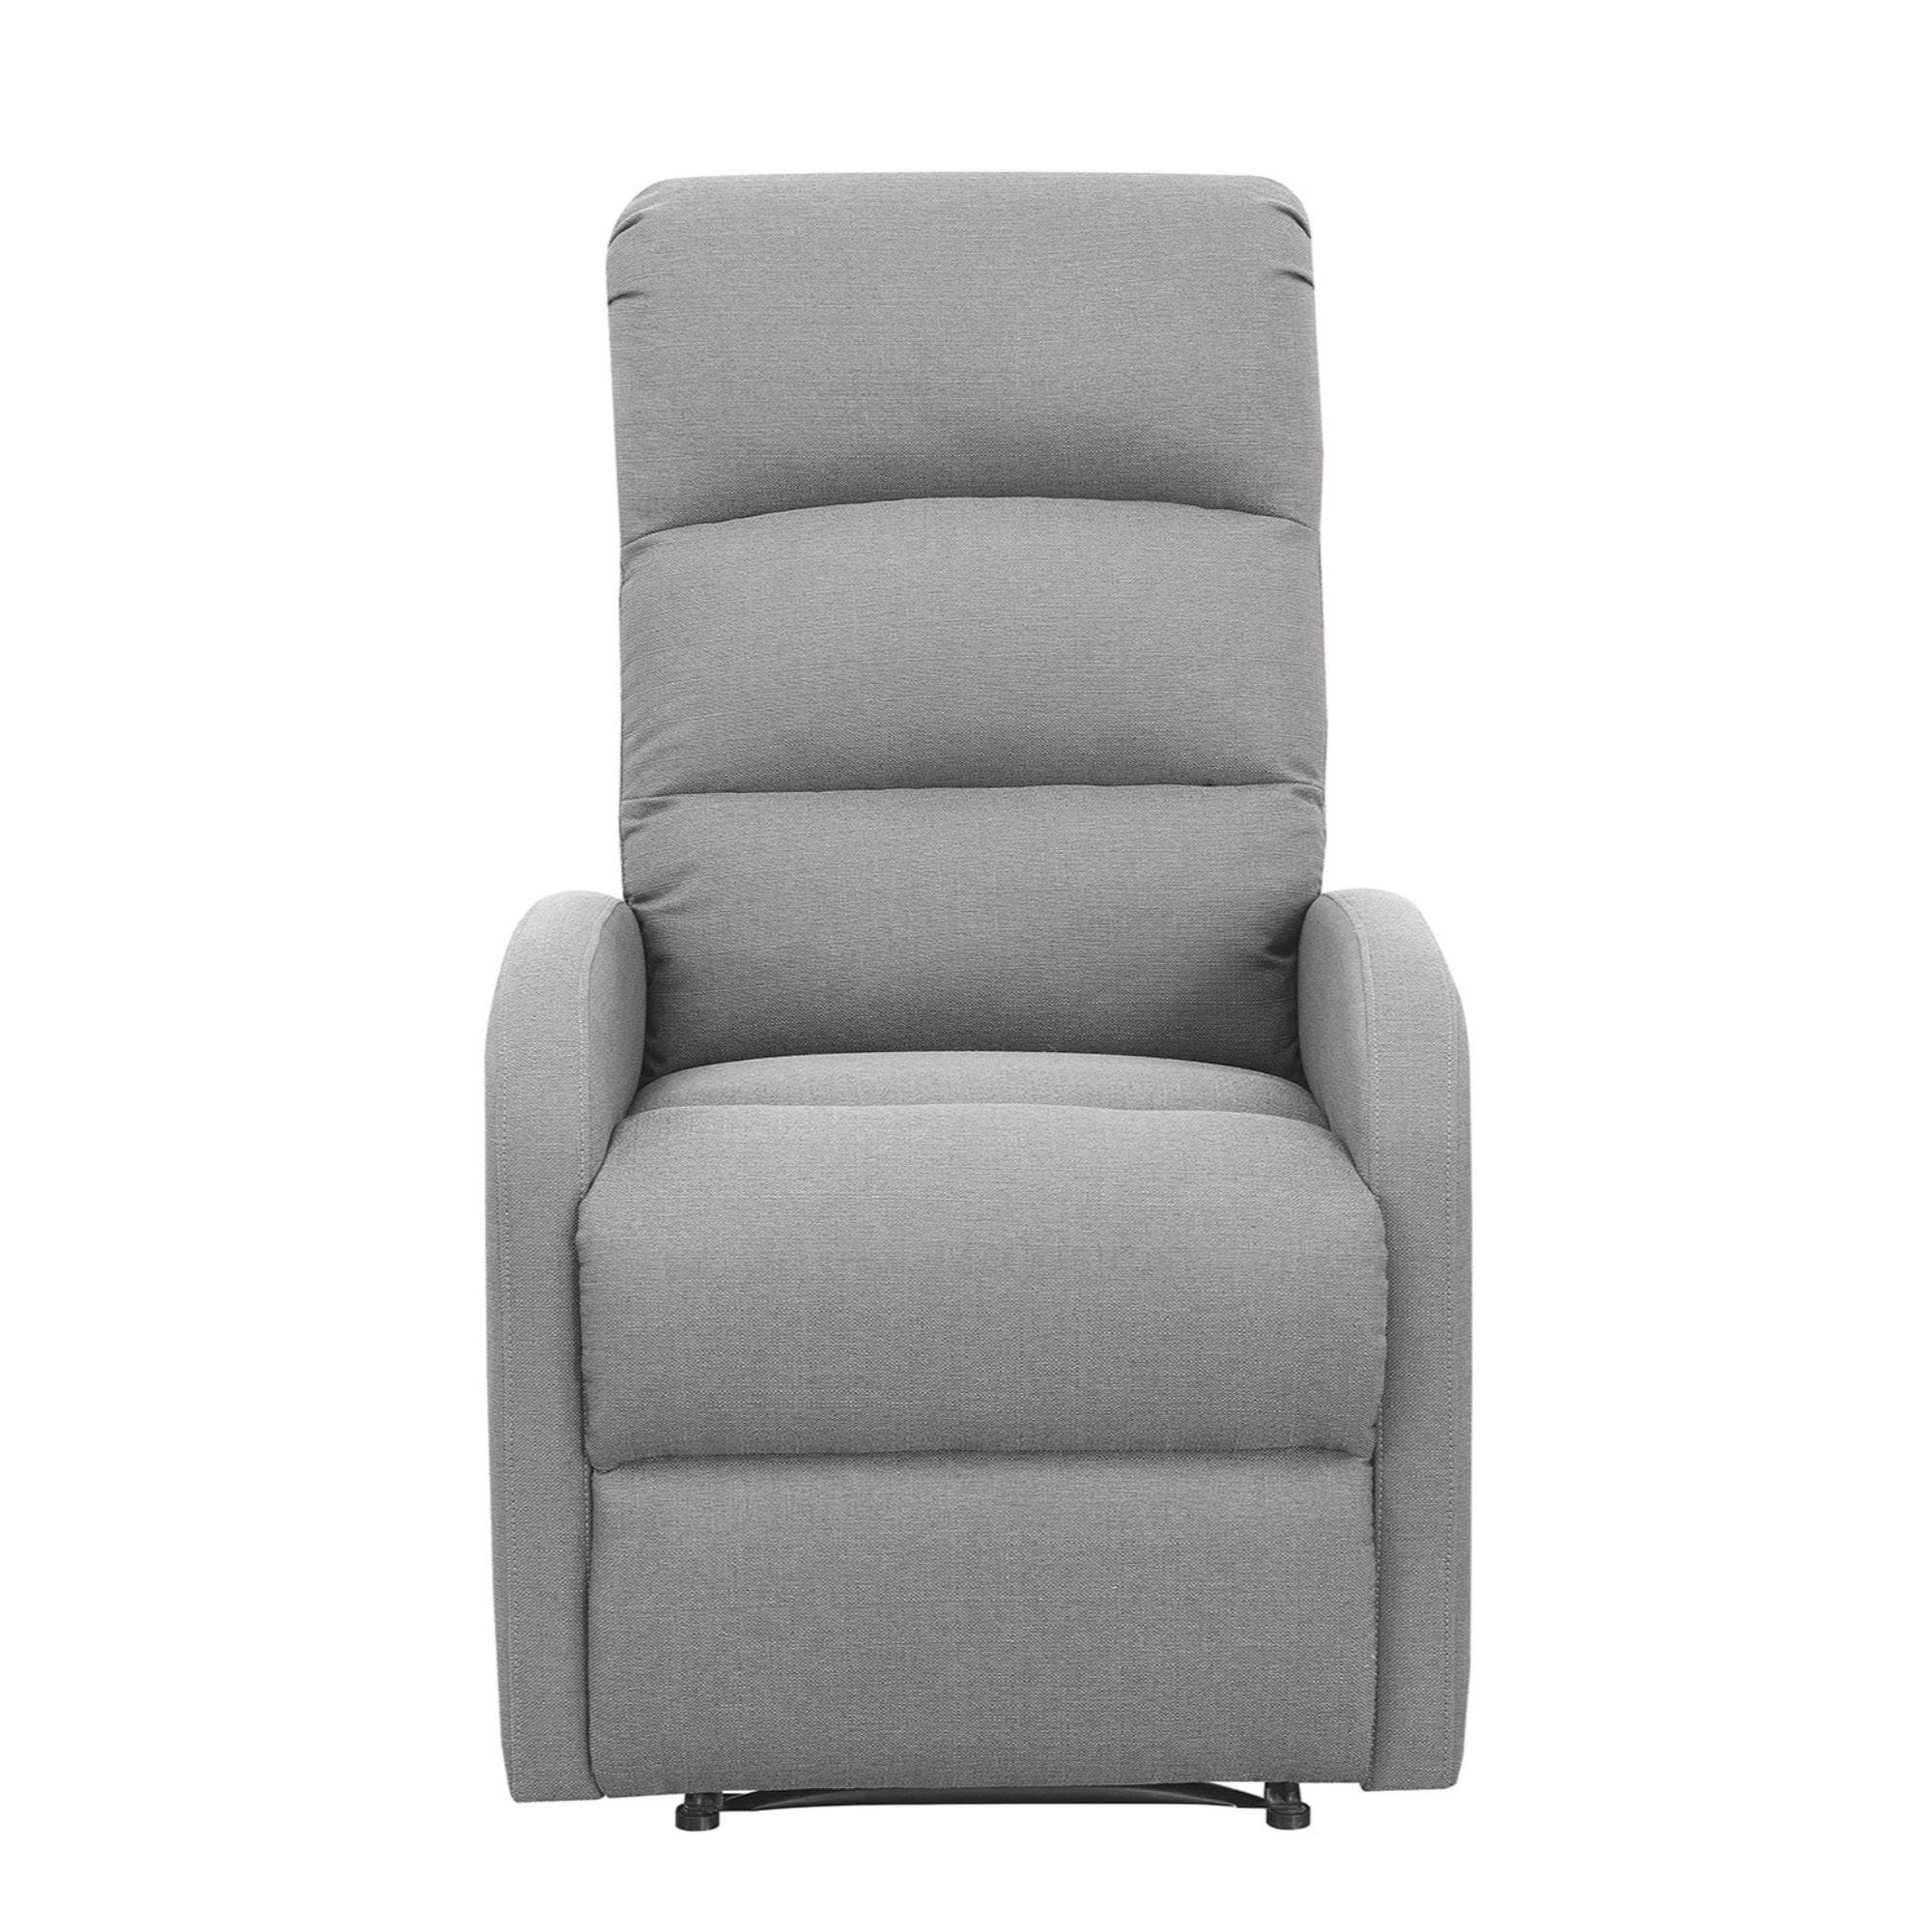 Emilia Cement Gray Overstuffed Recliner with Storage Pockets